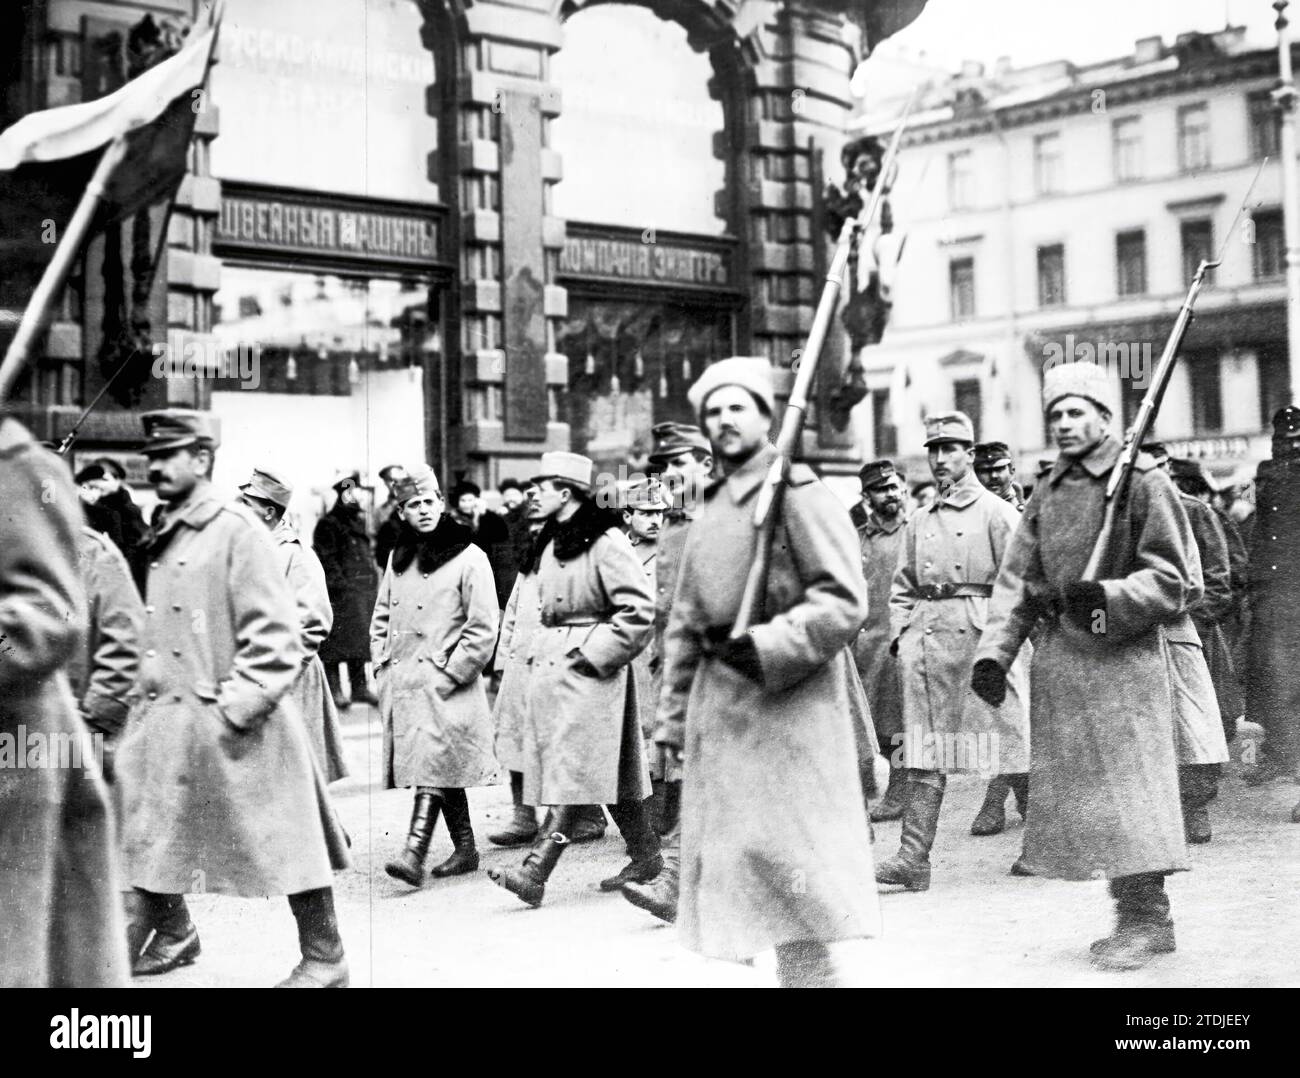 01/31/1916. The War in Eastern Europe. Columns of Austrian Prisoners Guarded by Russian Soldiers Upon Arrival in Saint Petersburg. Photo: R. Parrondo. Credit: Album / Archivo ABC / Parrondo Stock Photo